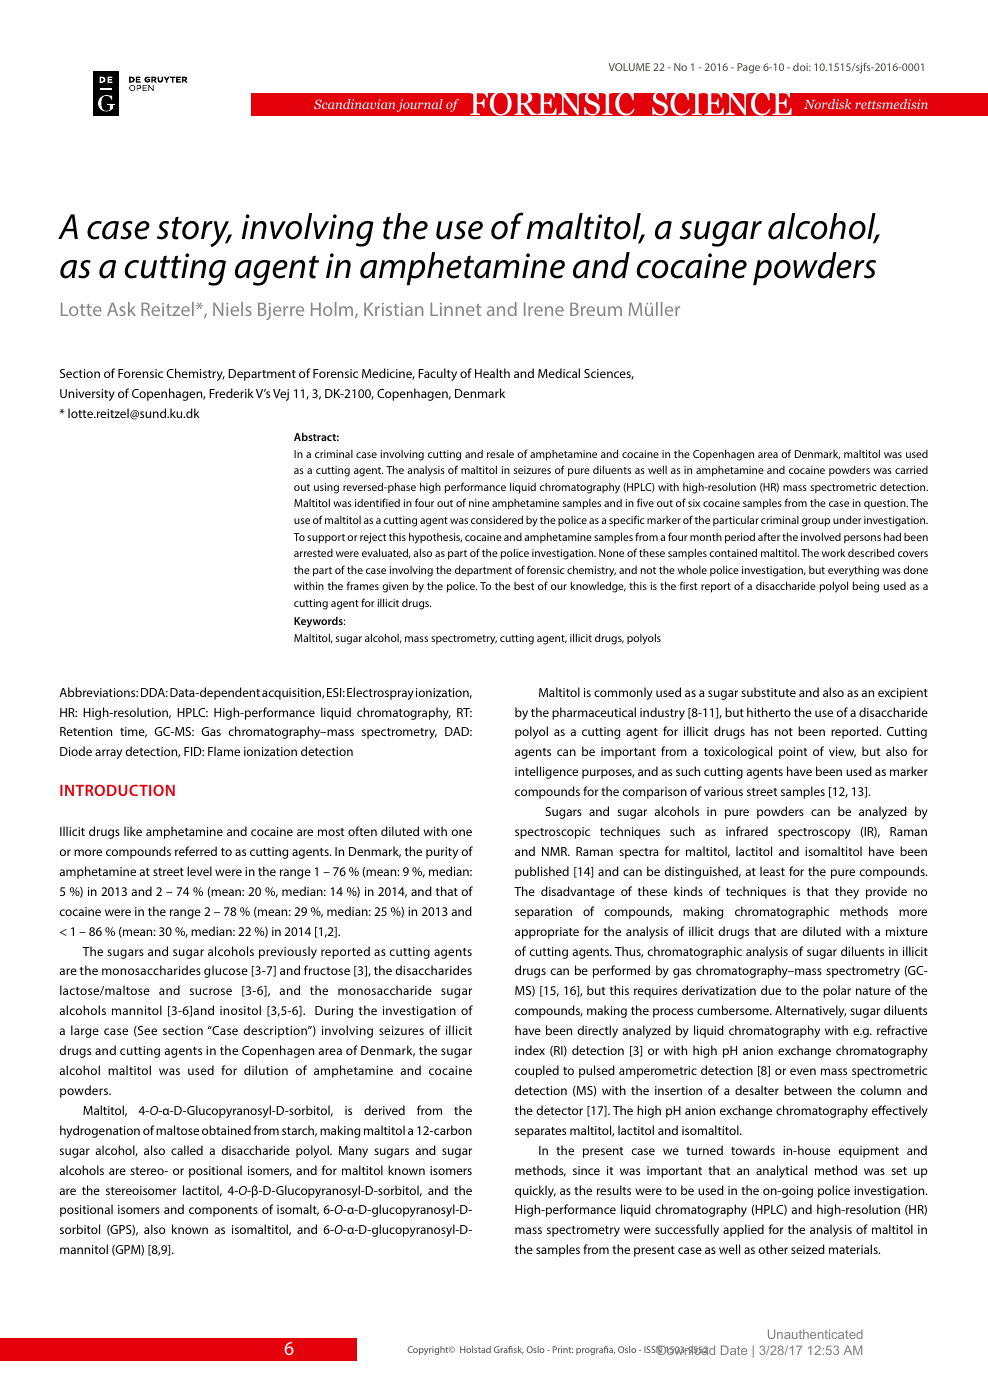 Jonglere damp Ruin A case story, involving the use of maltitol, a sugar alcohol, as a cutting  agent in amphetamine and cocaine powders – topic of research paper in  Chemical sciences. Download scholarly article PDF